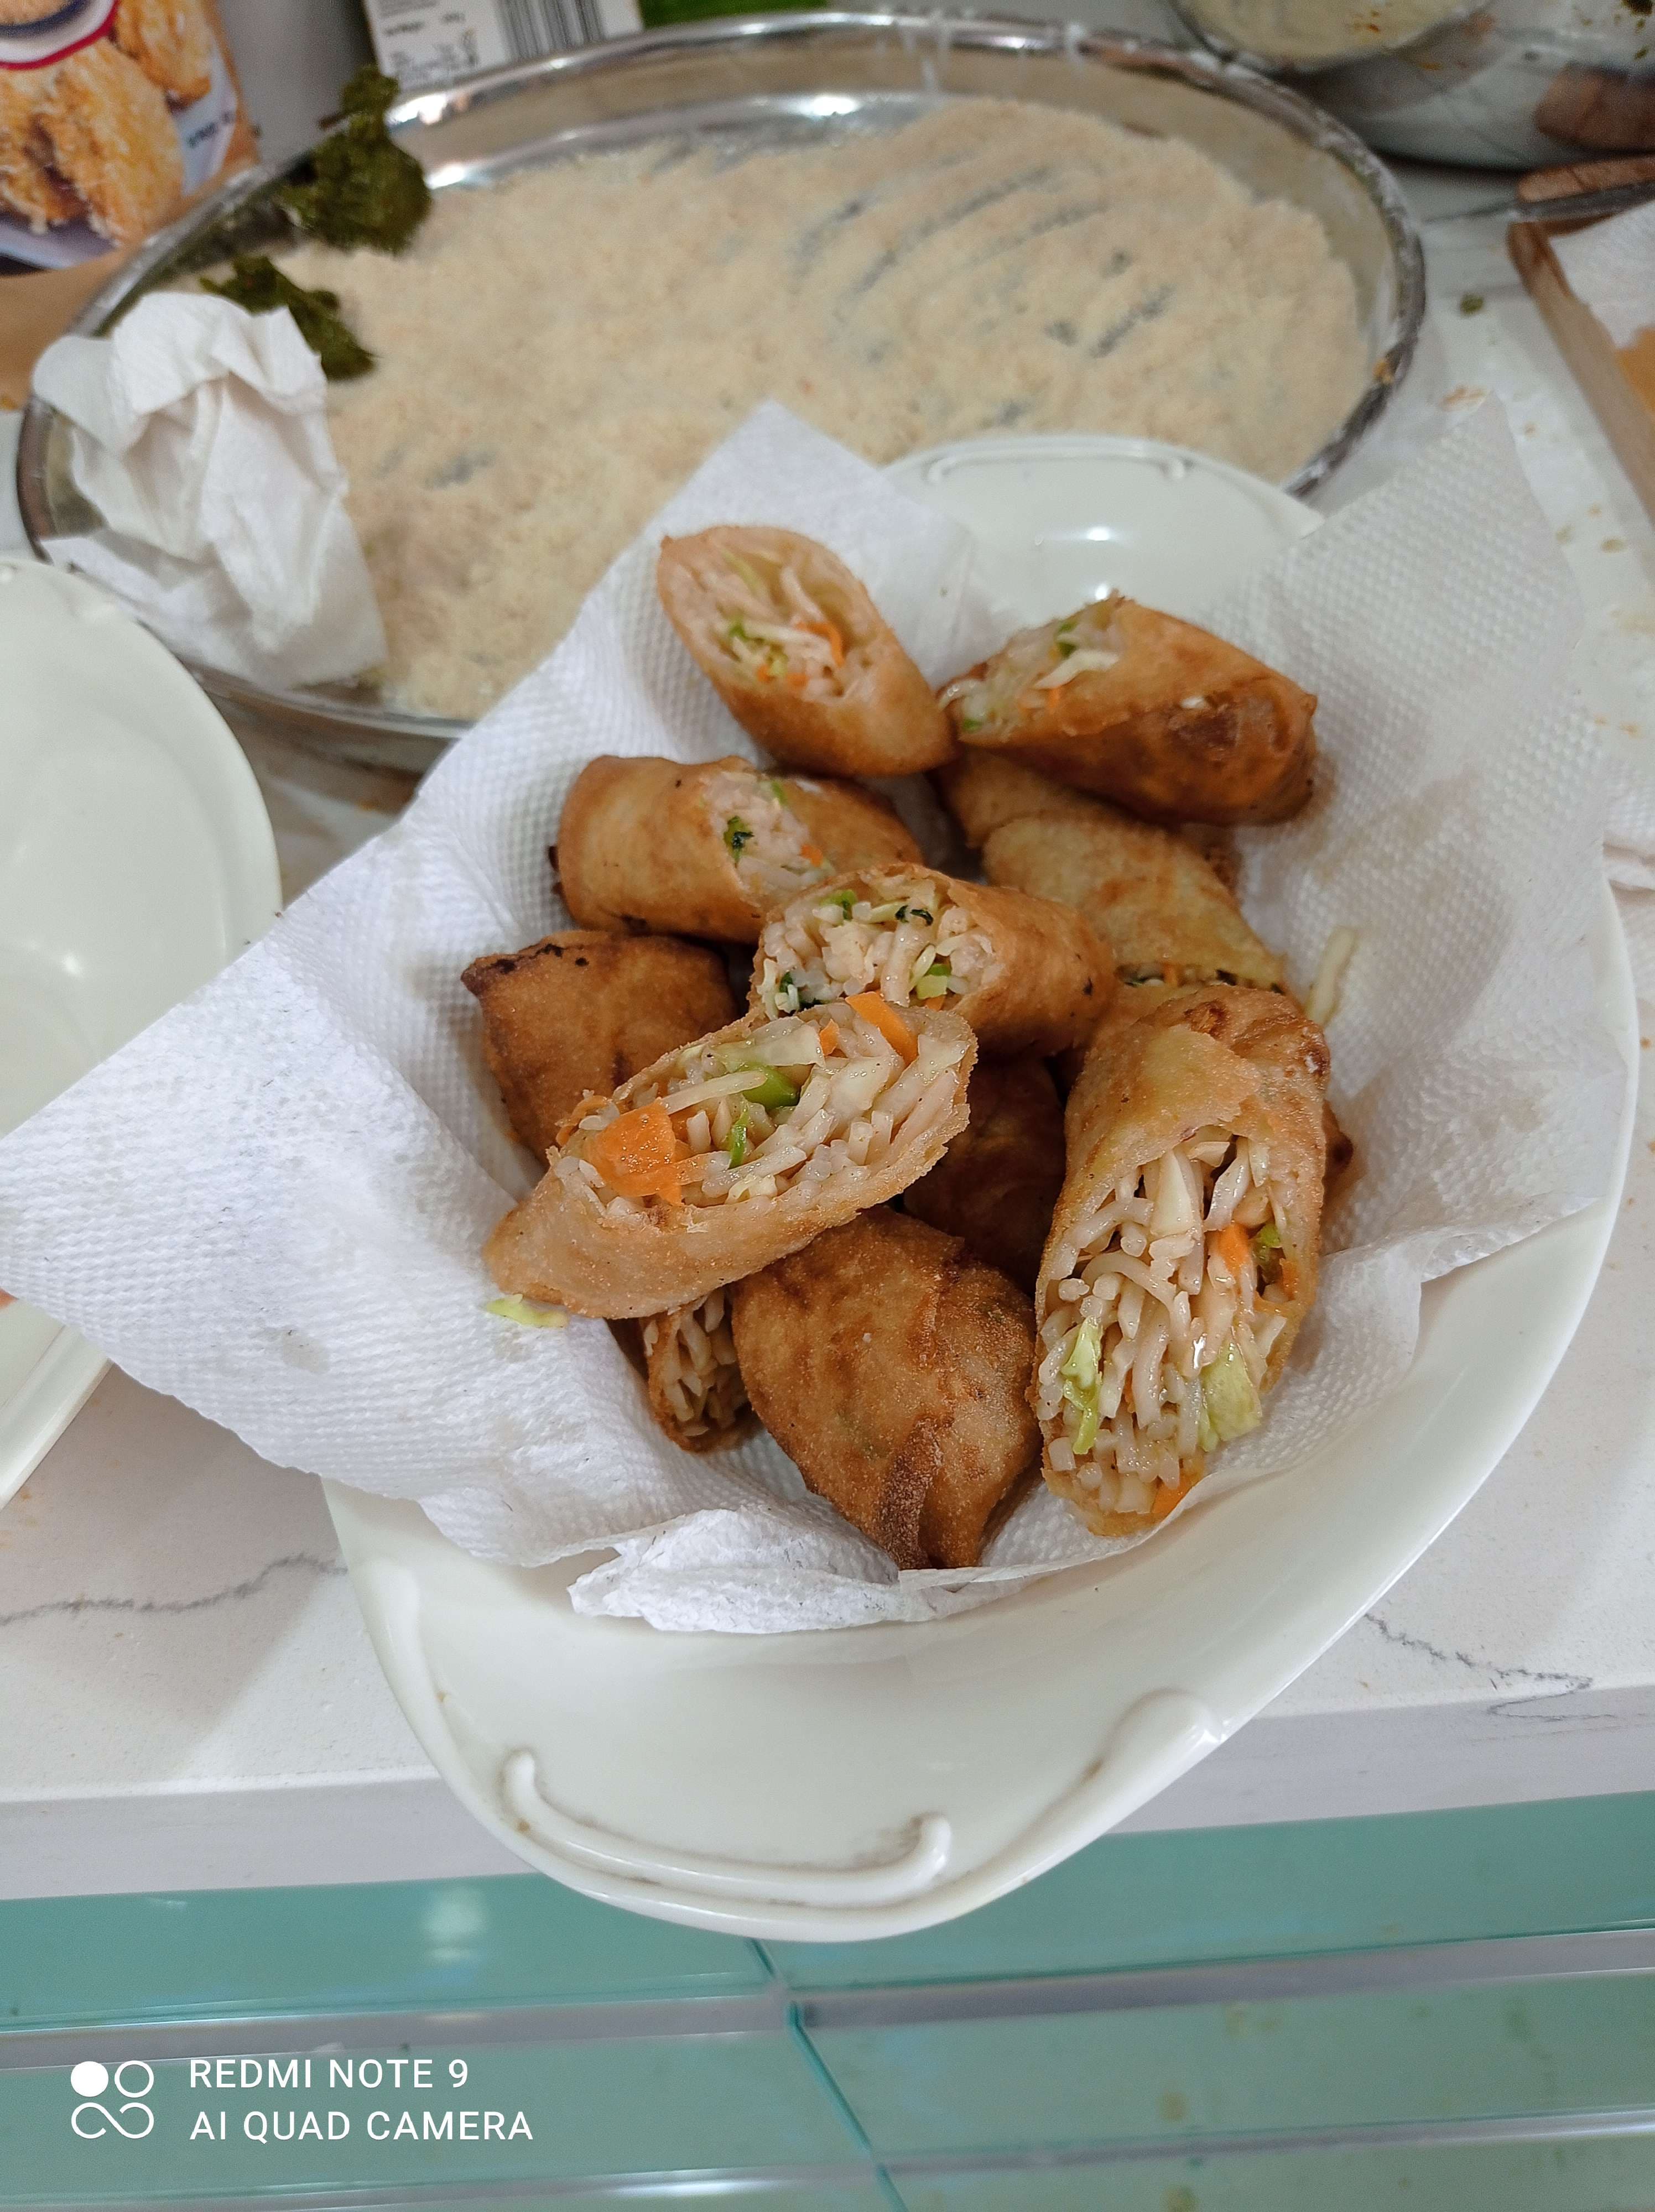 Tasty Veg Spring Rolls cooked by COOX chefs cooks during occasions parties events at home